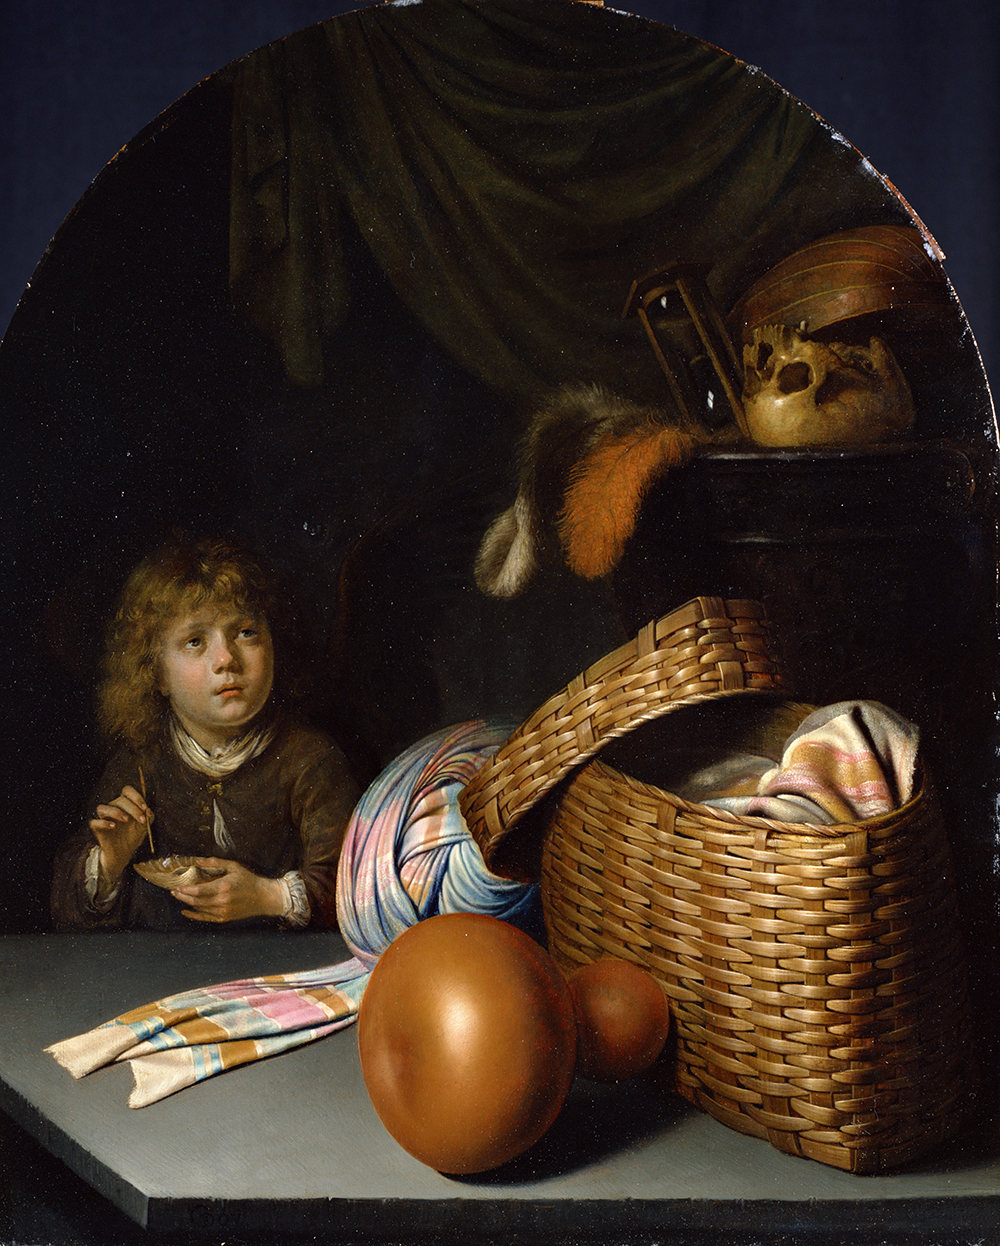 photo:Gerard Dou
Still Life with a Boy Blowing Soap-bubbles